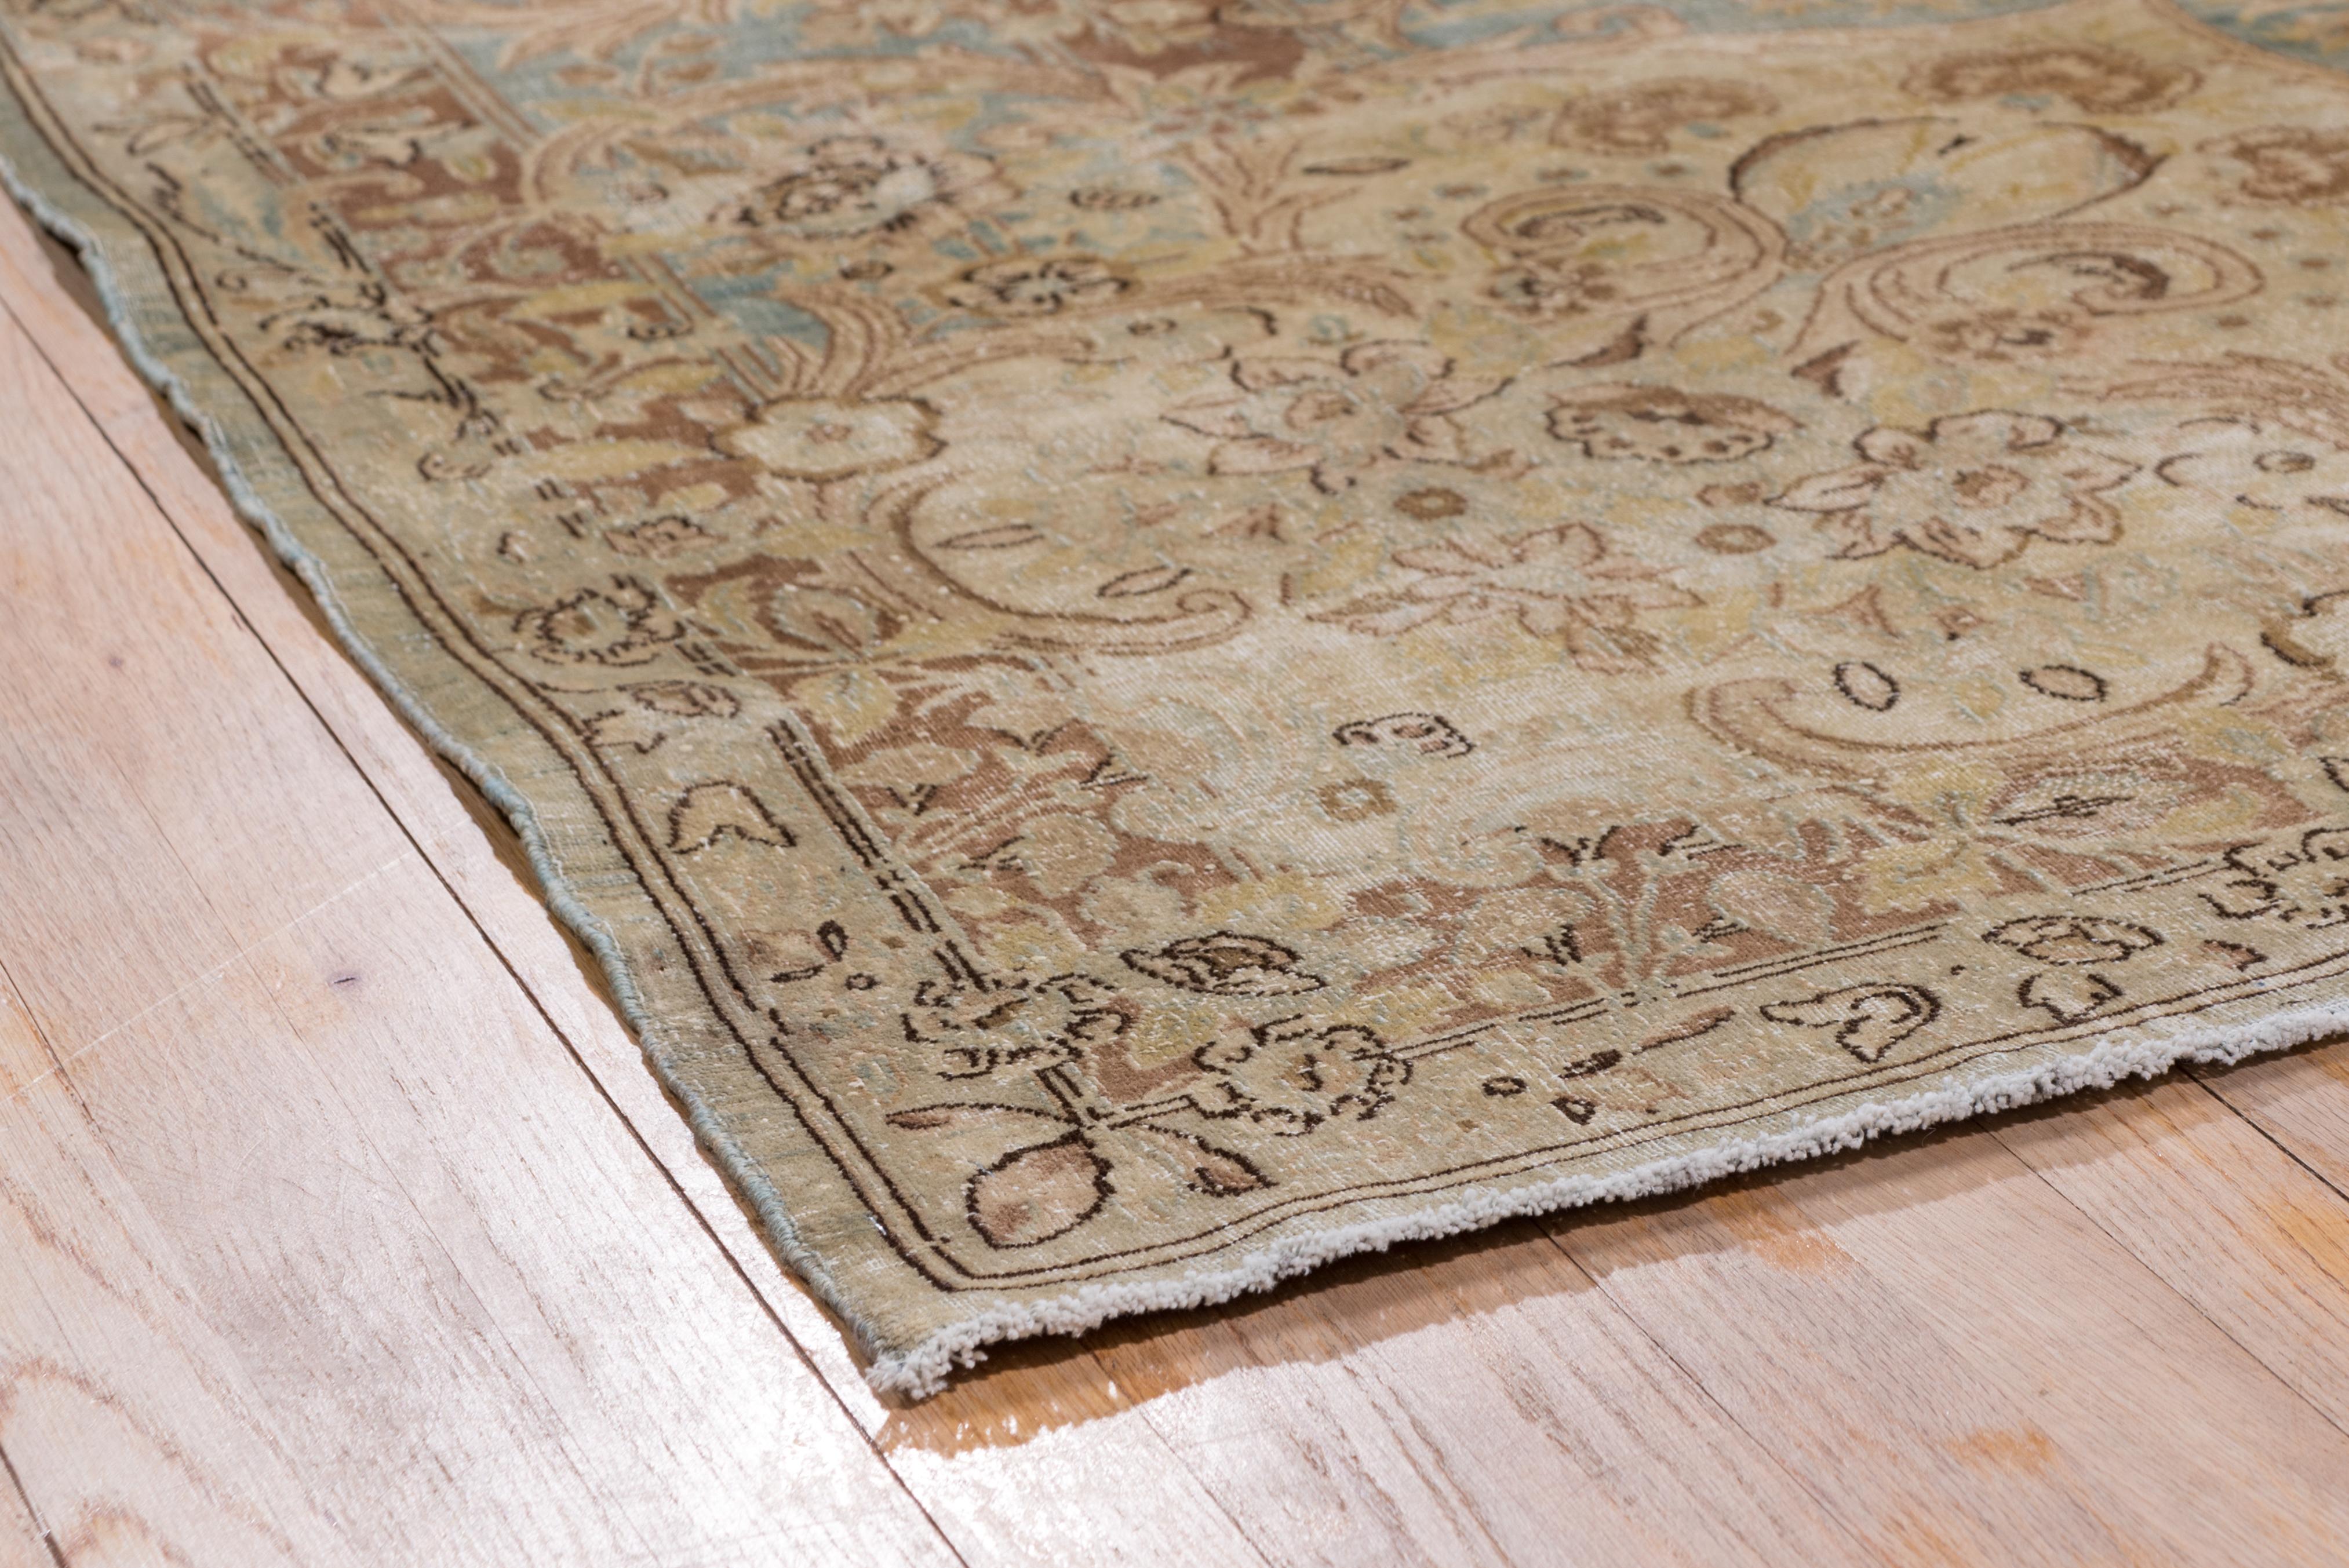 This elegant eastern Turkish urban carpet shows a light blue open field embracing a slightly scalloped and pendanted medallion with surrounding semi-circular garlands, all within a Kerman-style partially broken light blue acanthus and floral border.